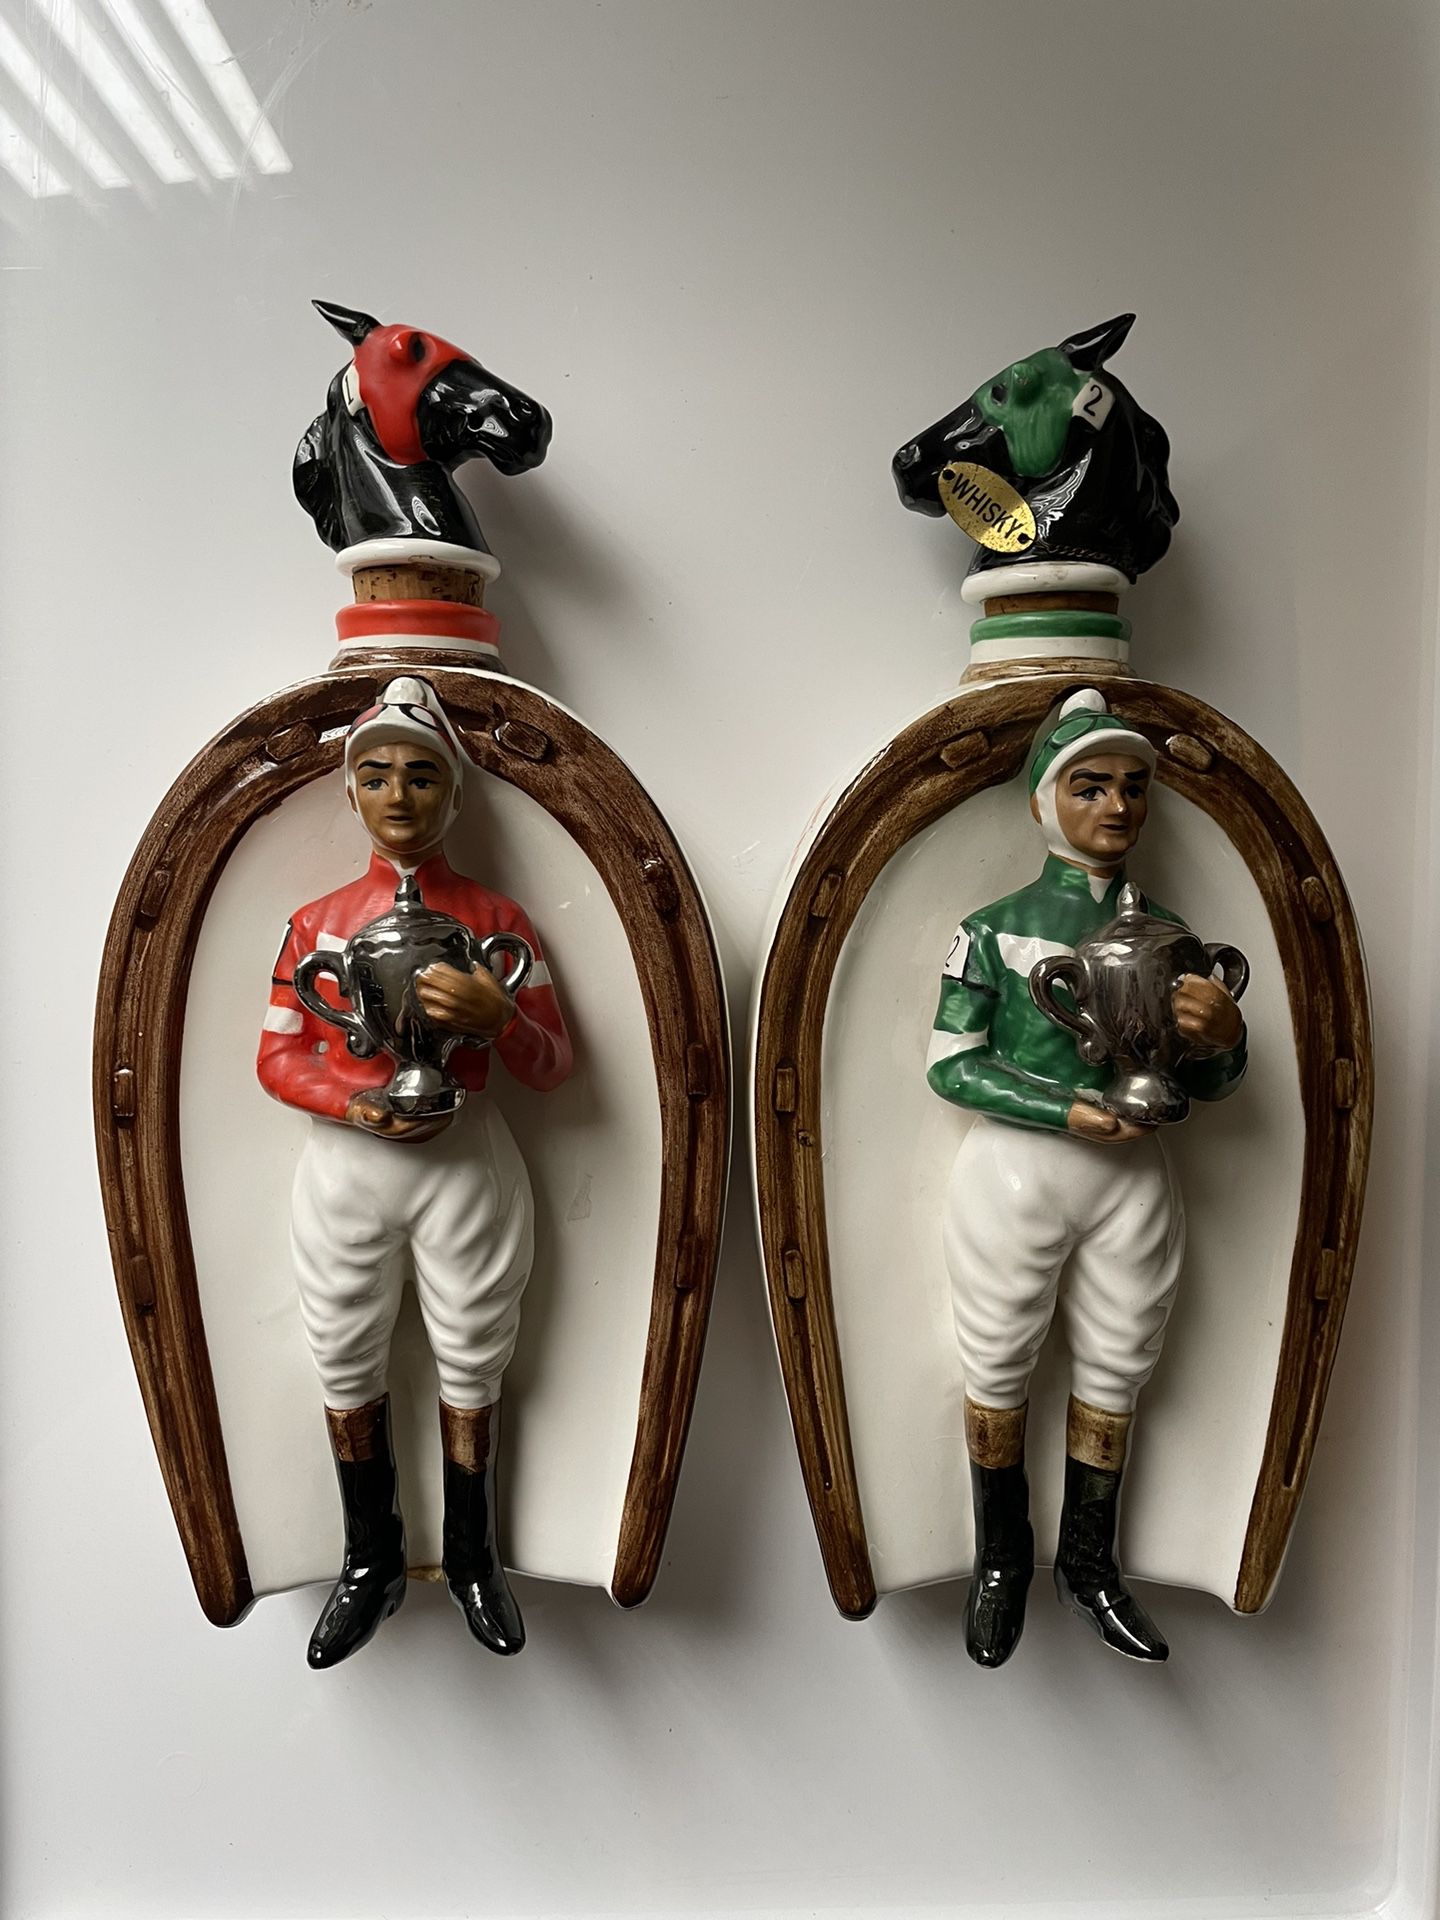 Set Of 2 Mid Century Horse Racing Scotch Decanter Vintage Bottle- At The Post By Swank